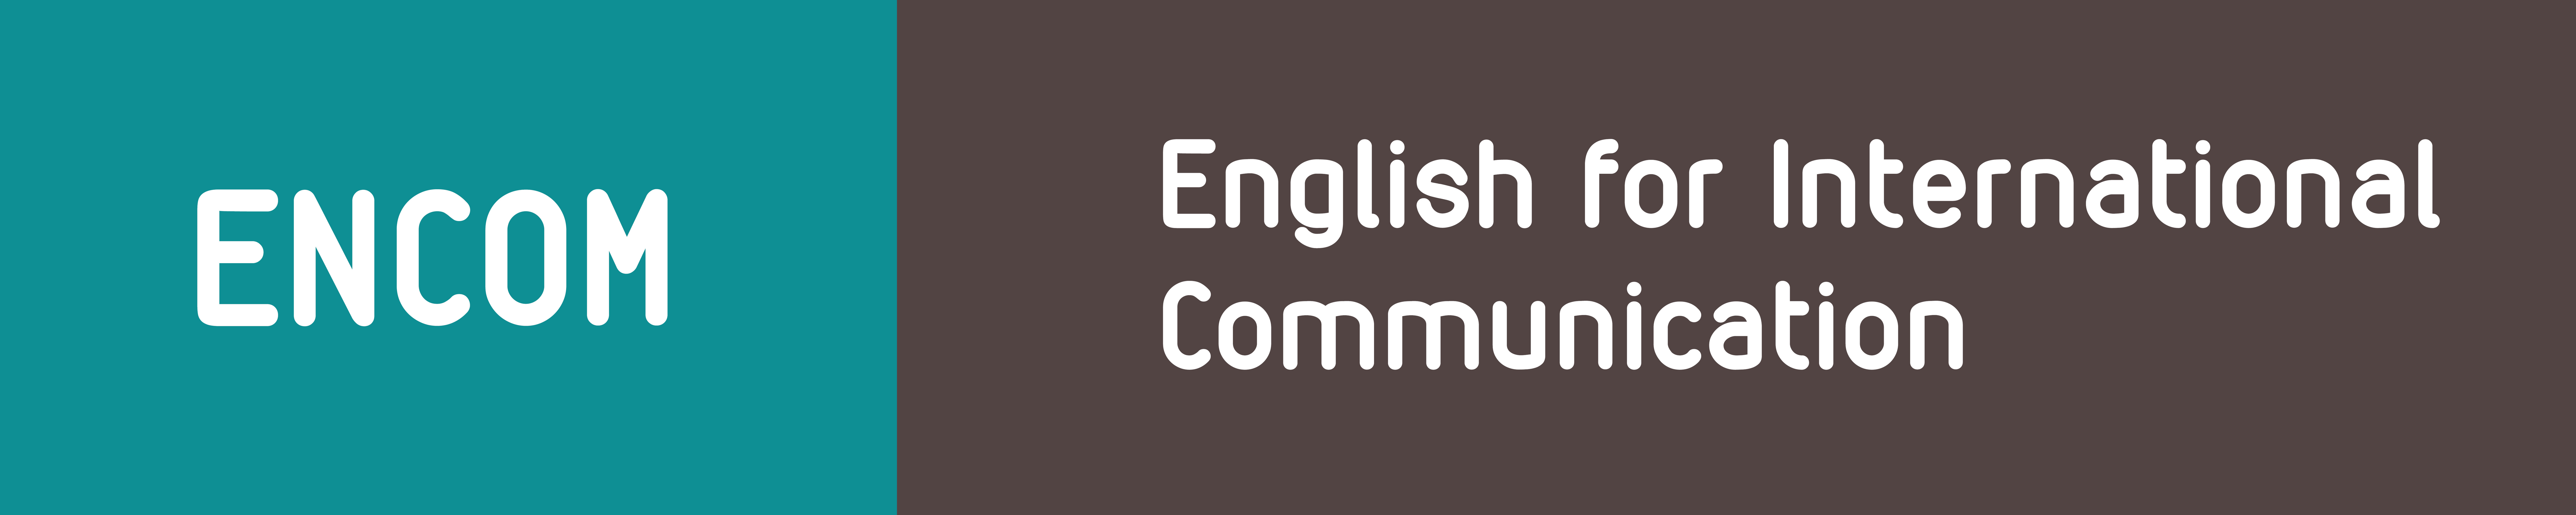 Bachelor of Arts (Hons.) in English For International Communication